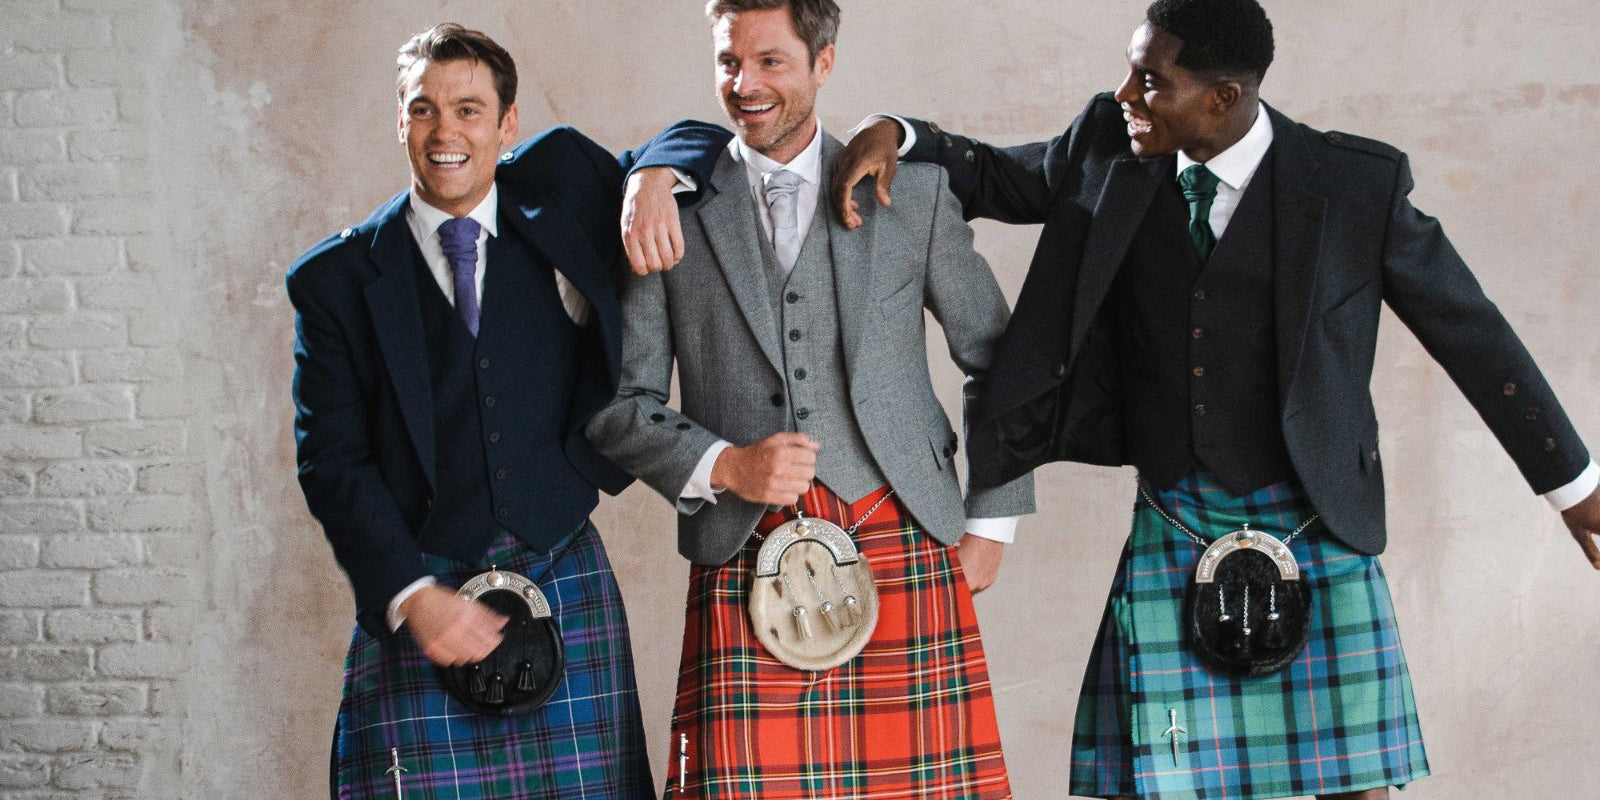 Highland Dress Guide: The History & Attire